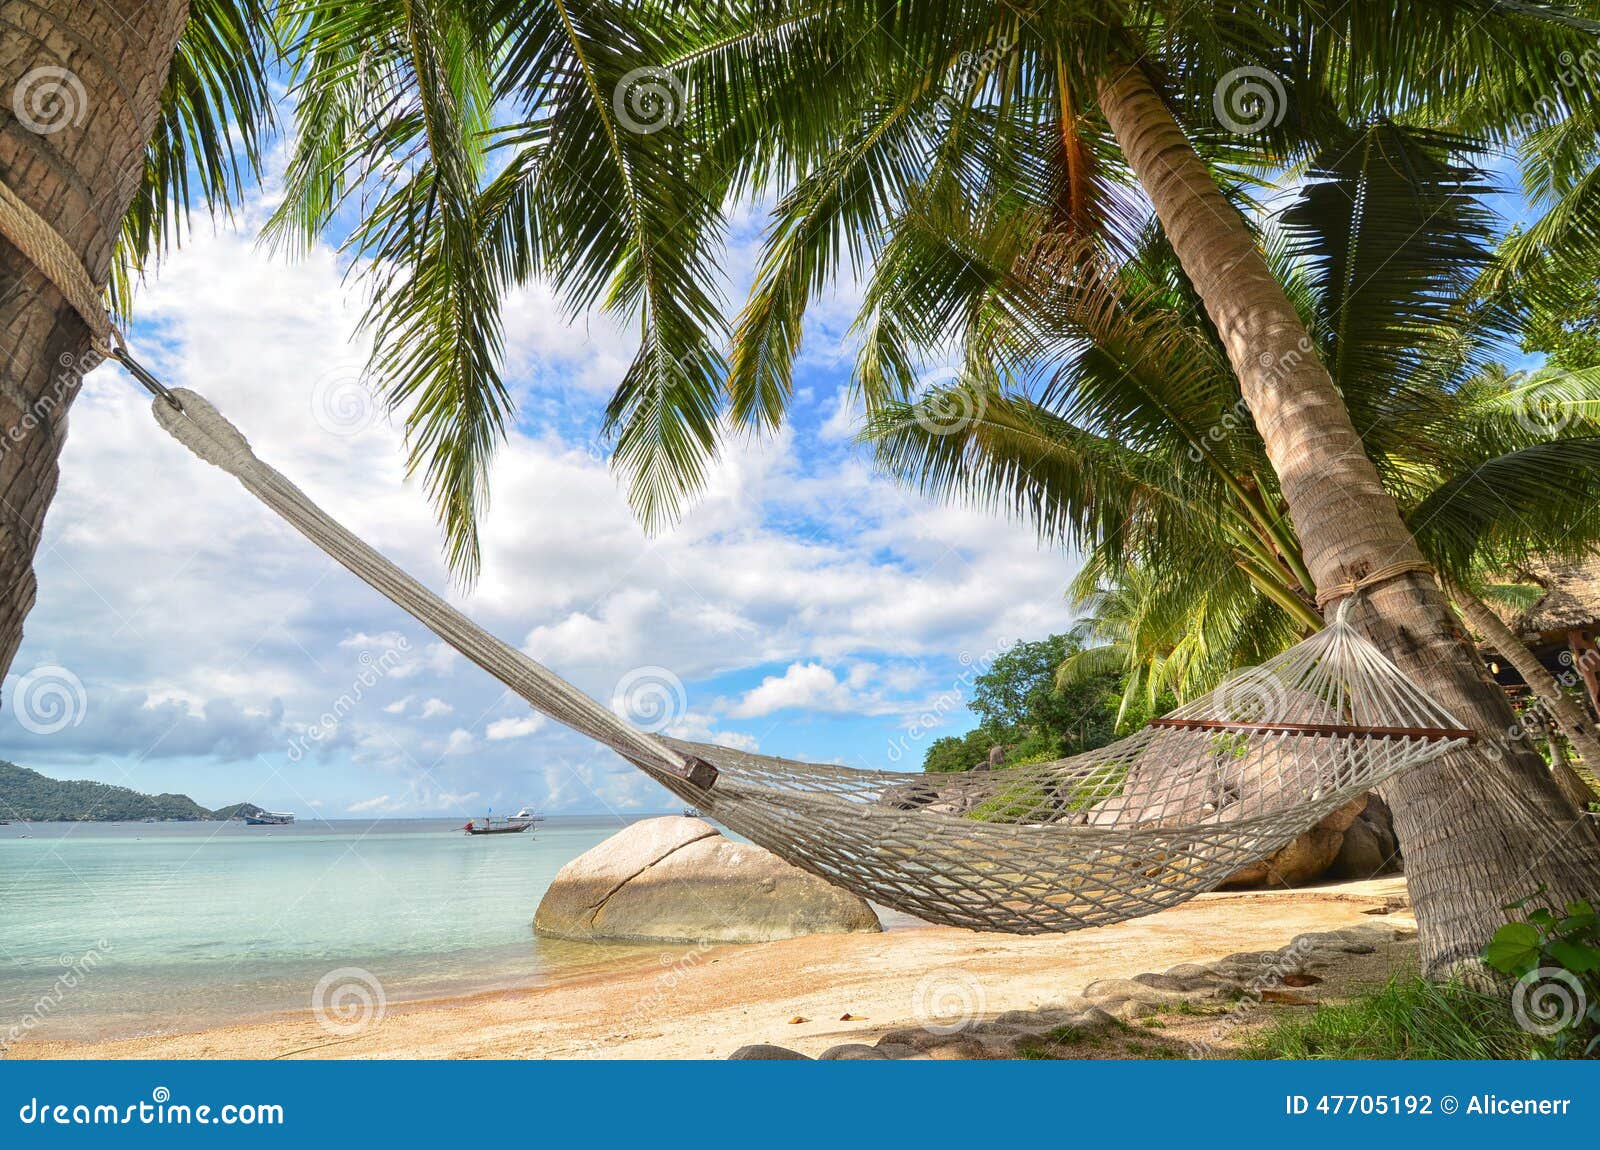 Hammock Hanging between Palm Trees at the Sandy Beach and Sea 